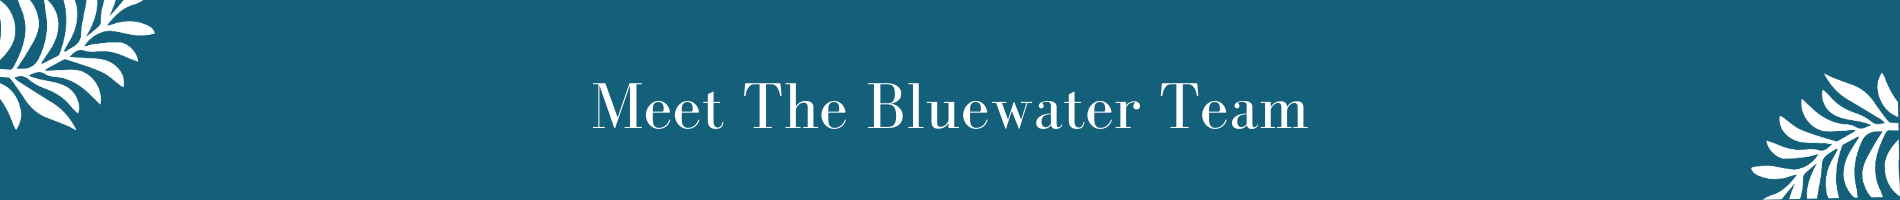 Meet The Bluewater Team